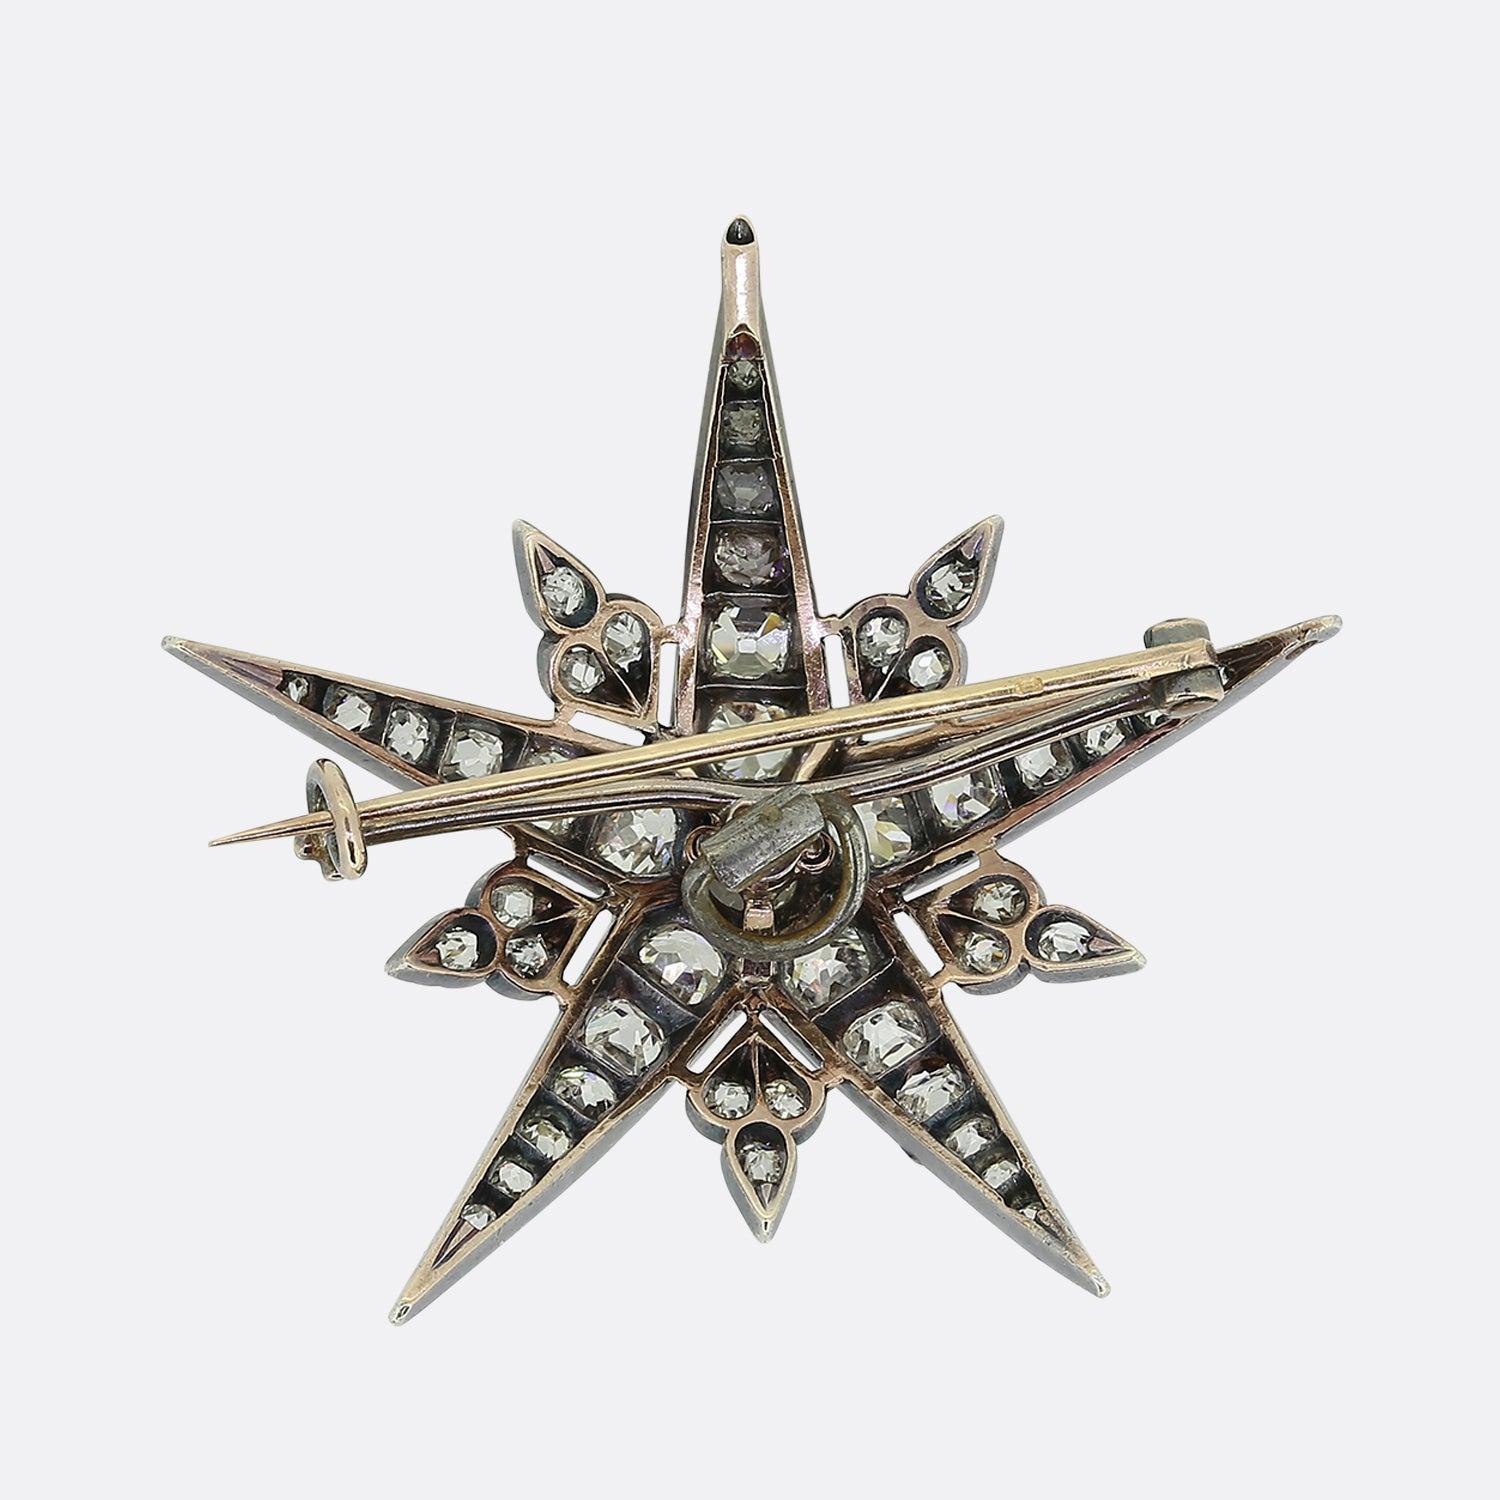 Here we have a glorious diamond brooch dating back to the Victorian era. This antique piece has been crafted from yellow gold into the shape of a 5 pointed star consisting of round faceted old cut diamonds; each of which is separated by a tiny